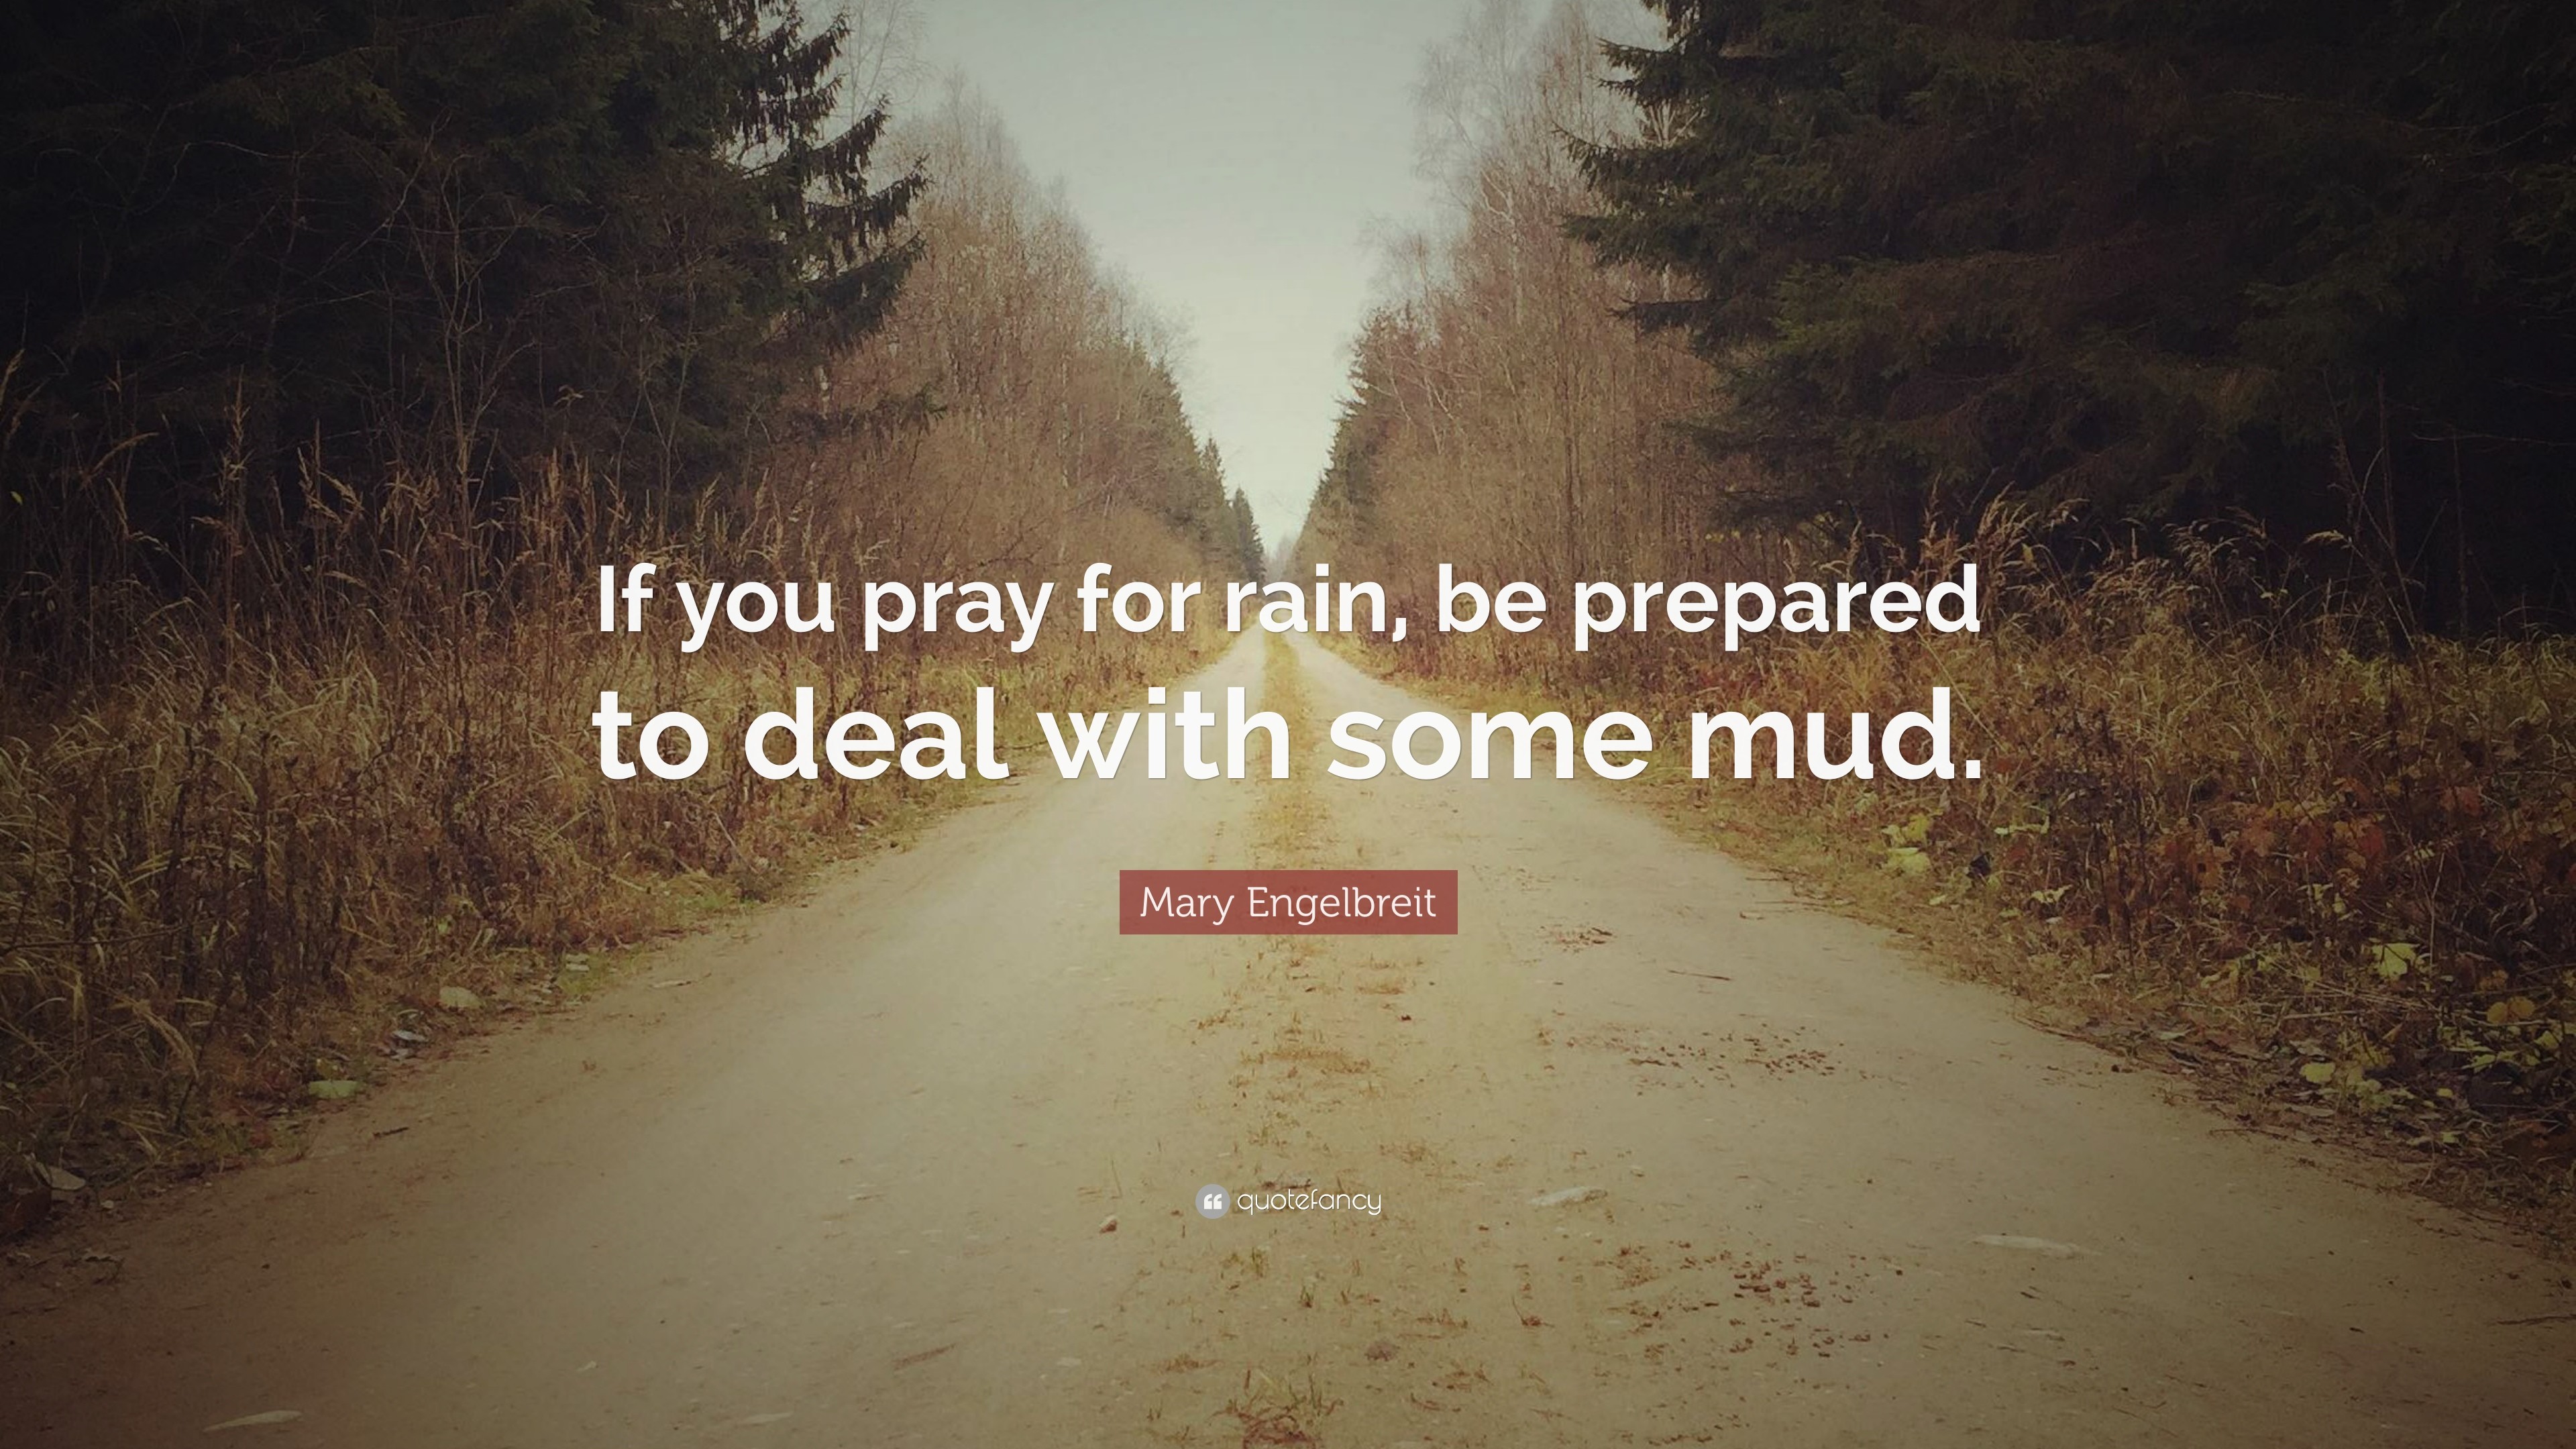 3840x2160 Mary Engelbreit Quote: “If you pray for rain, be prepared to deal with